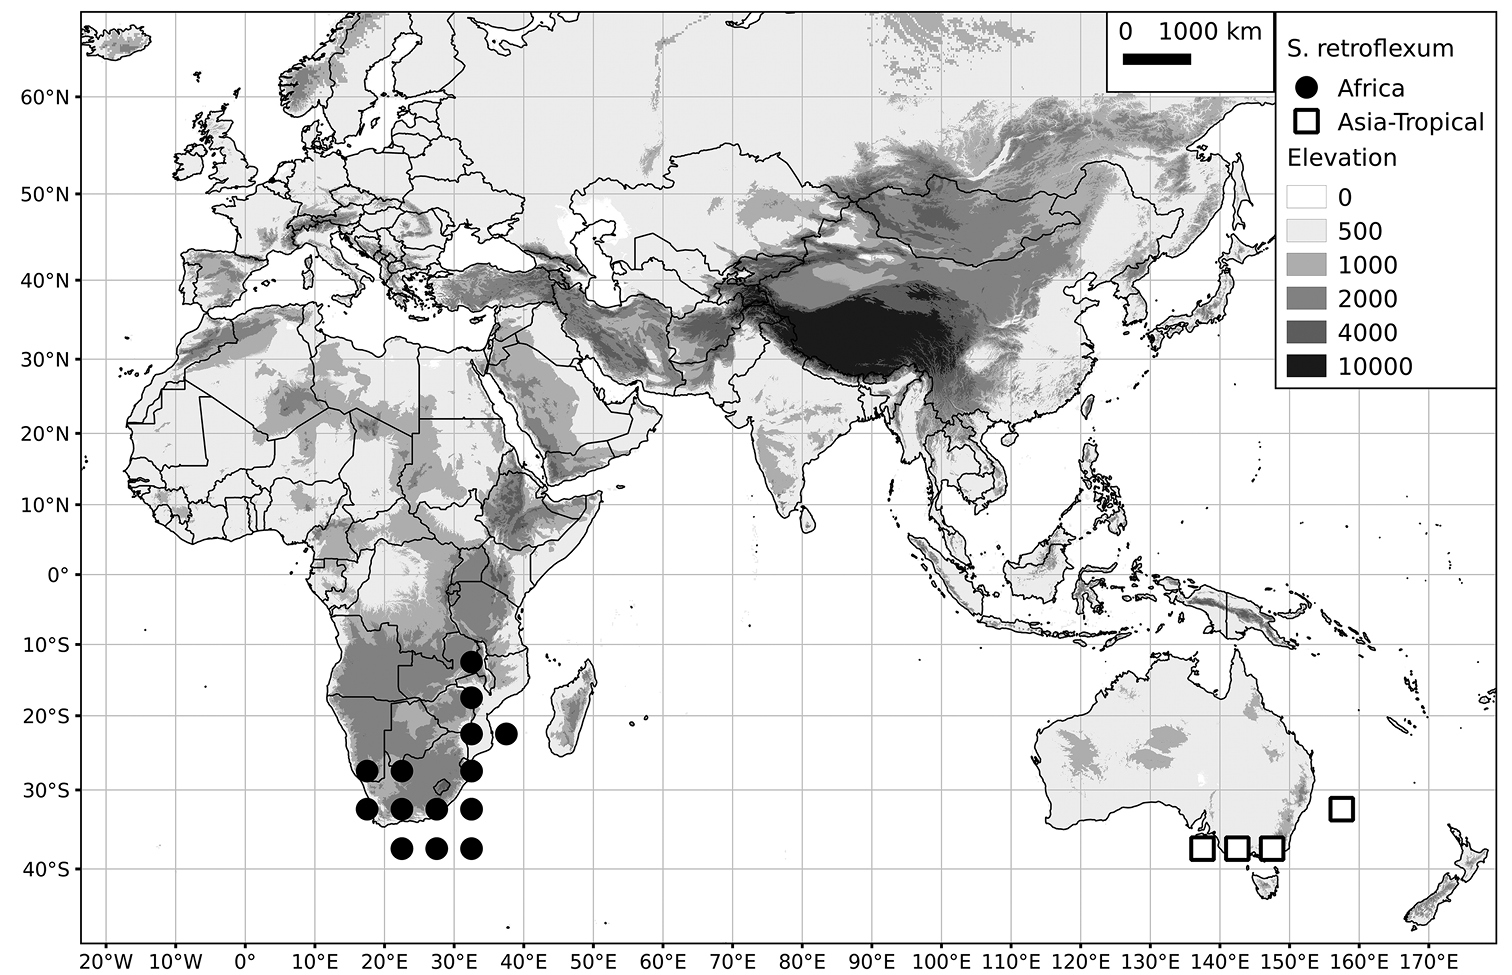 A revision of the Old World Black Nightshades (Morelloid clade of Solanum L., Solanaceae)